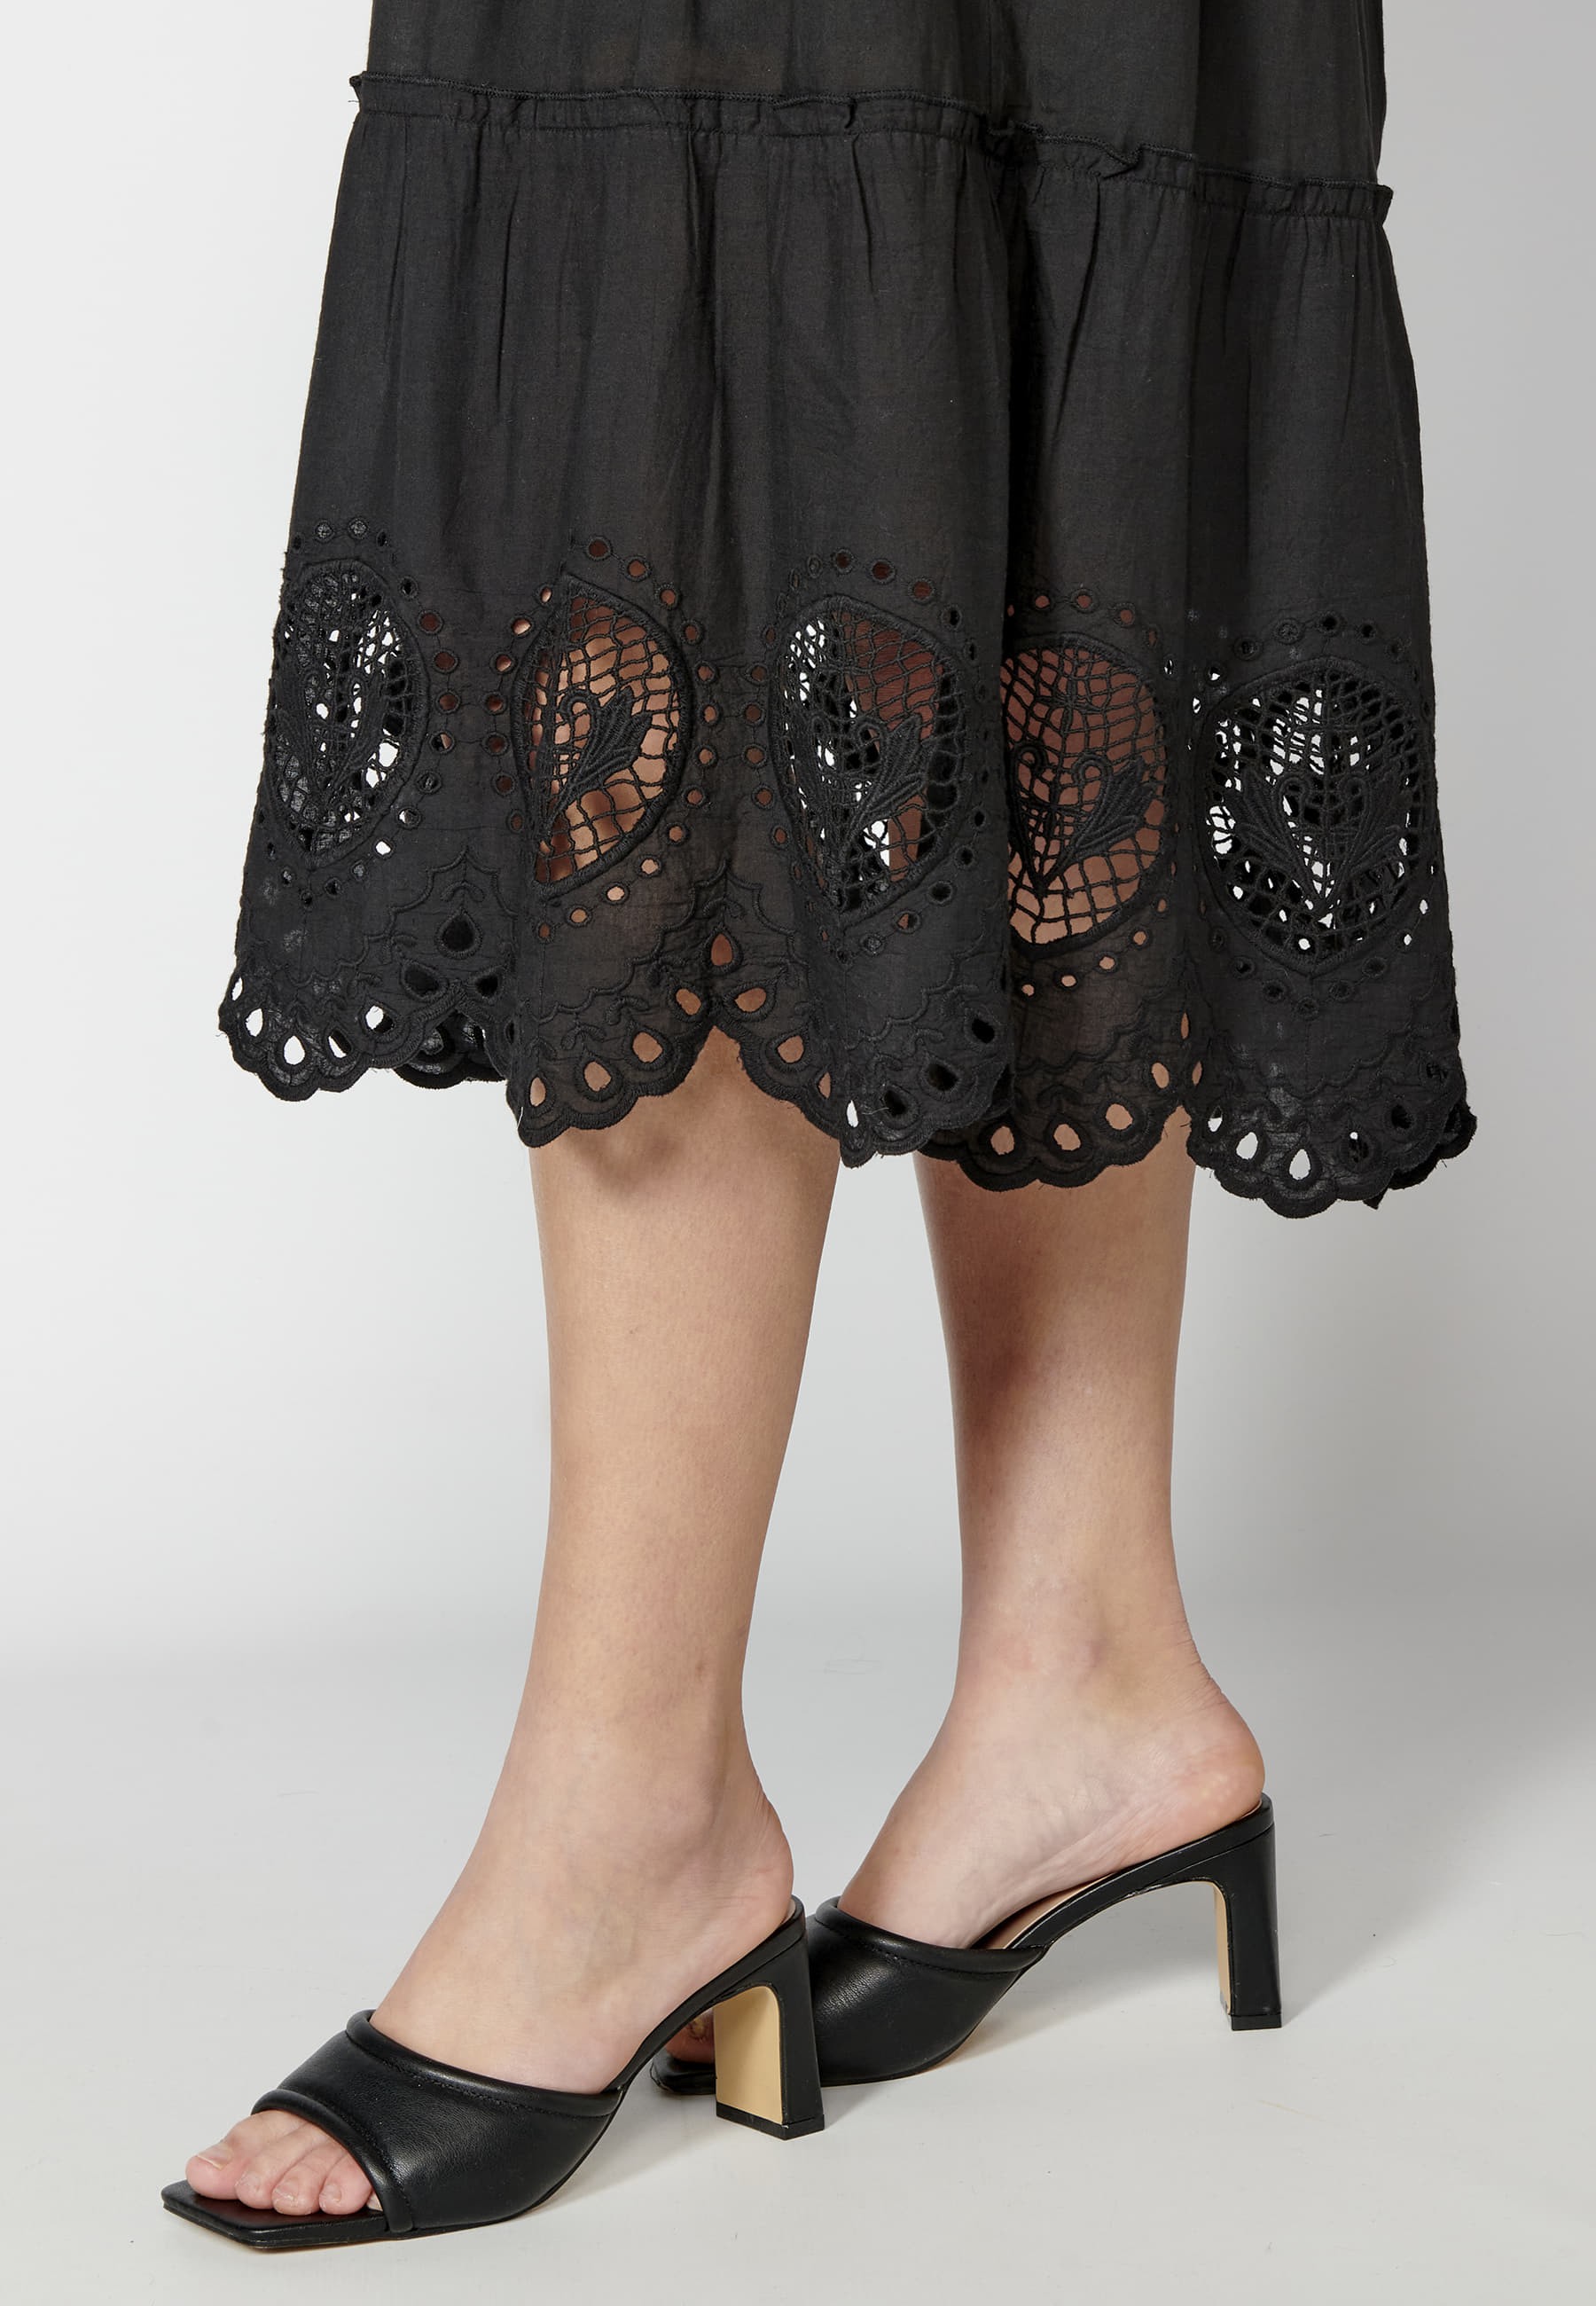 Long Cotton Strappy Dress with Black Embroidery for Woman